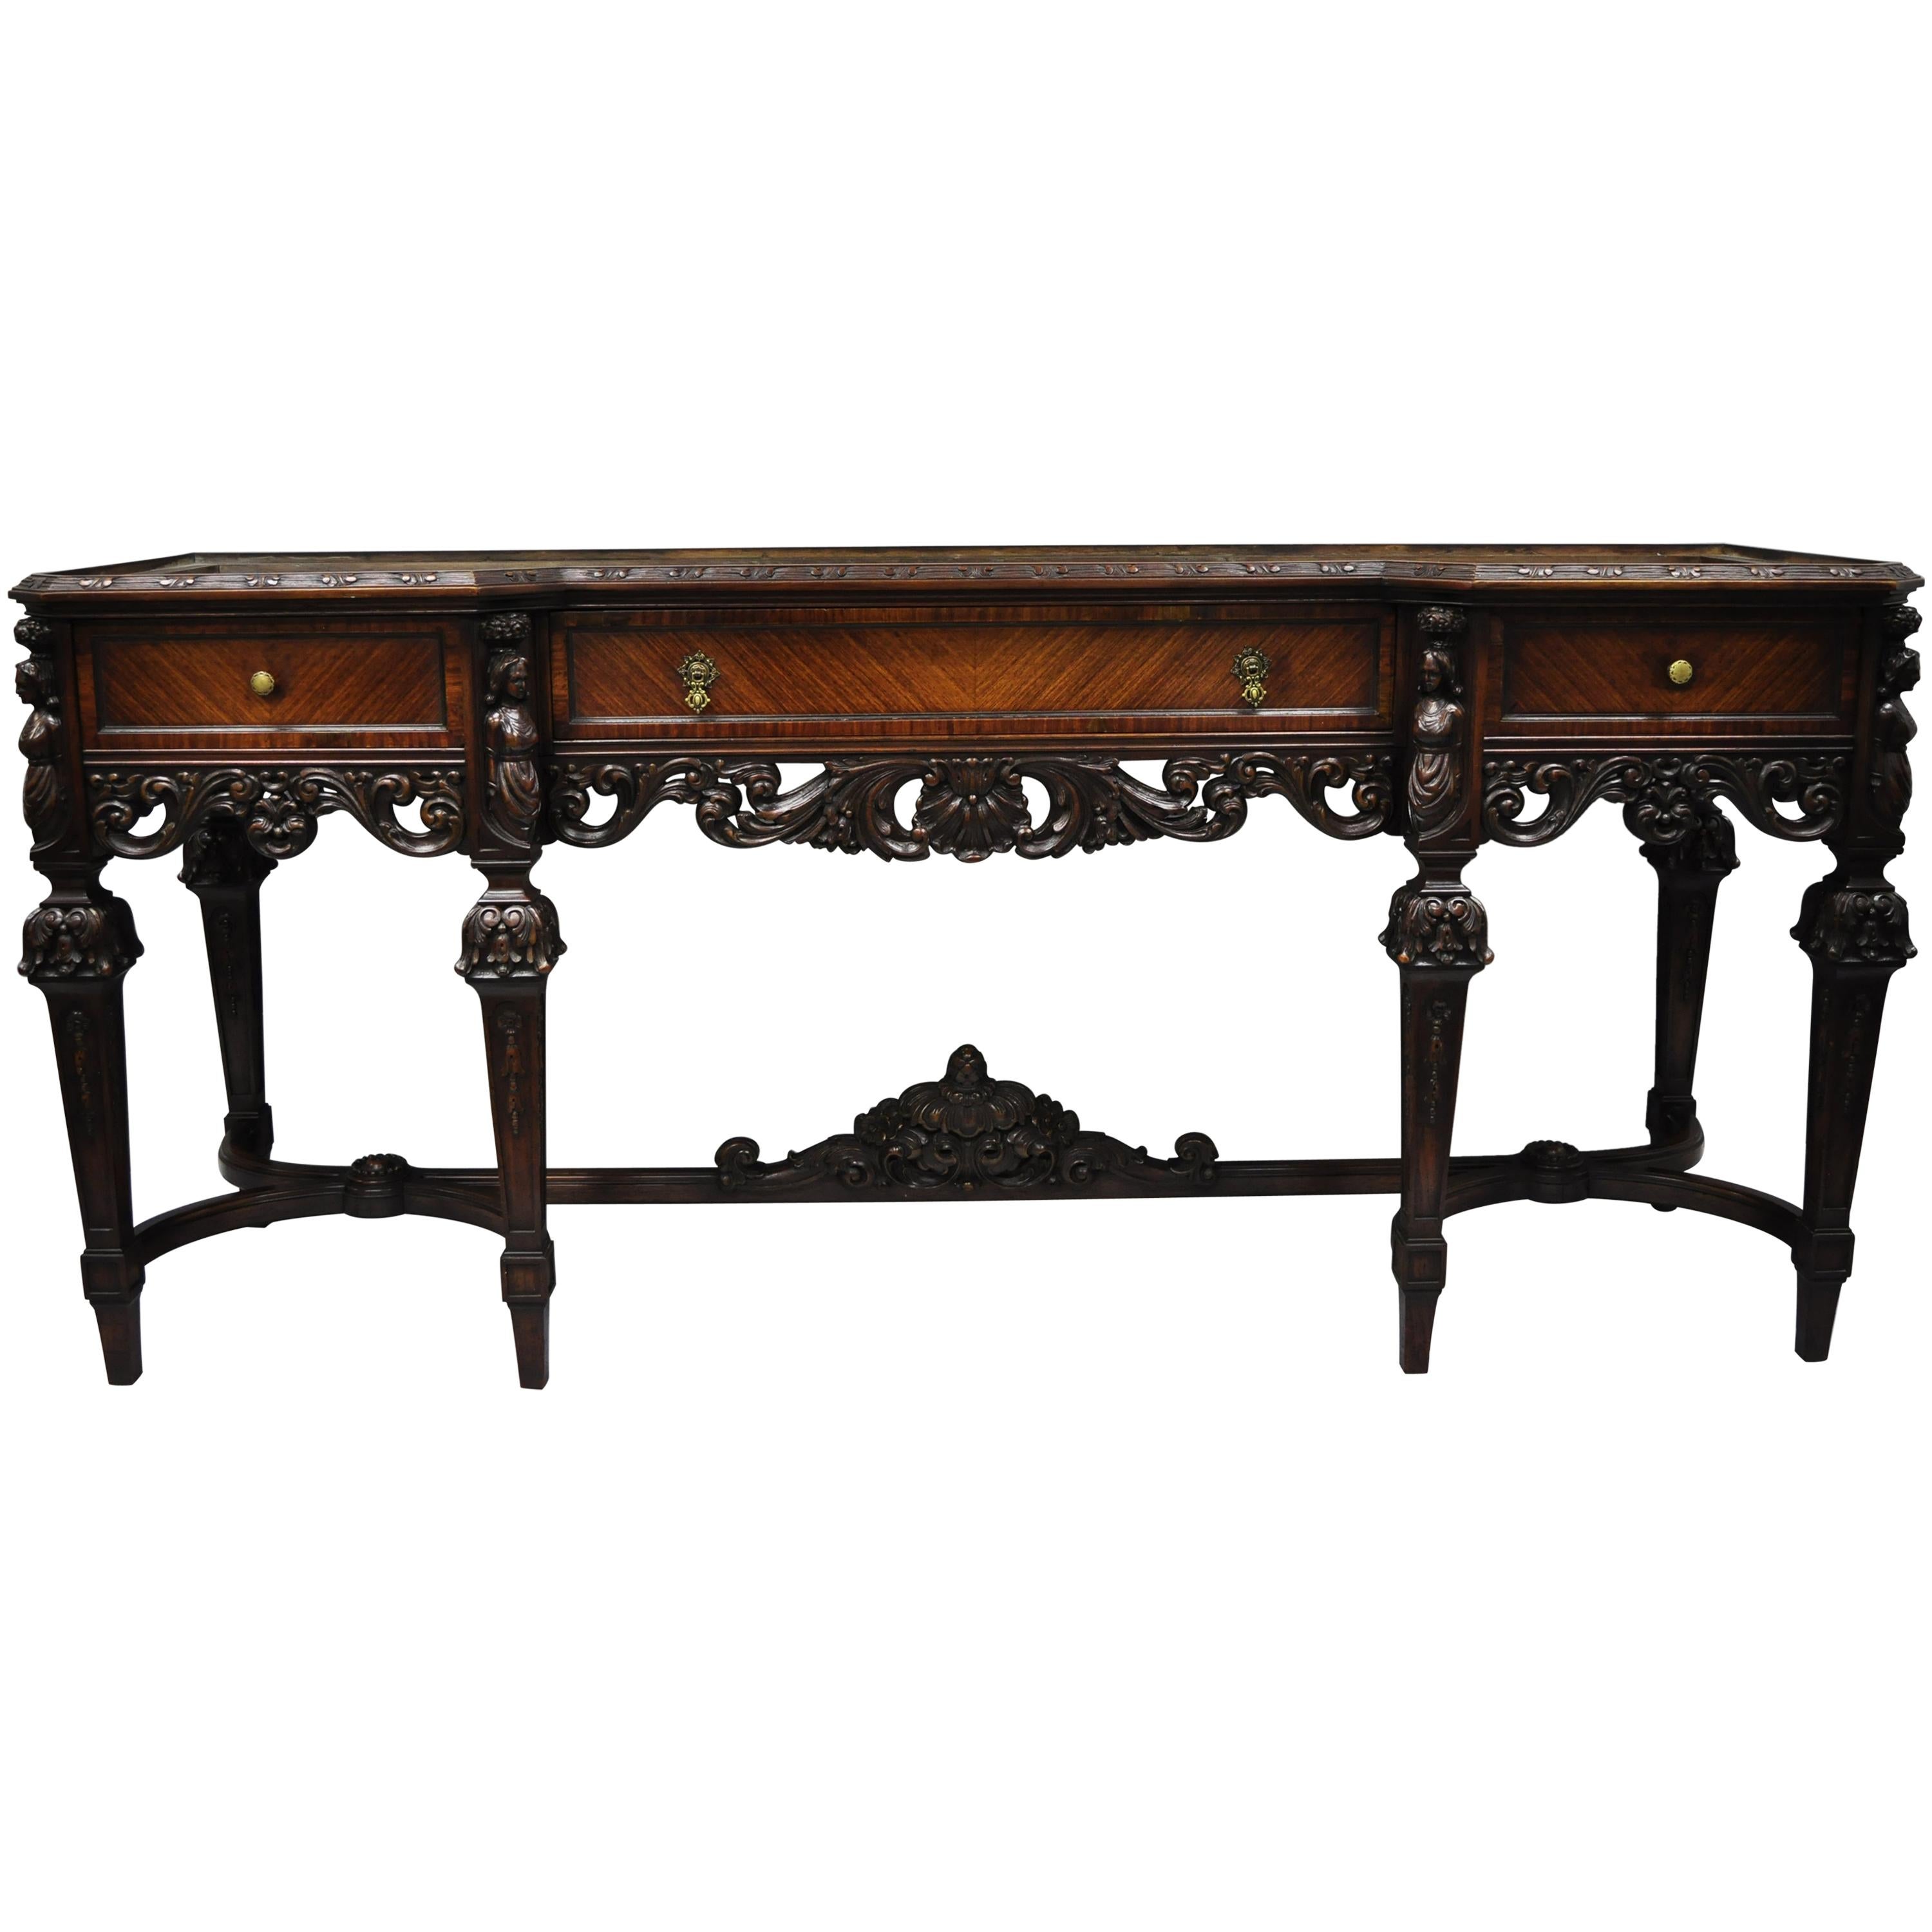 Italian Renaissance Revival French Baroque Style Figural Carved Walnut Sideboard